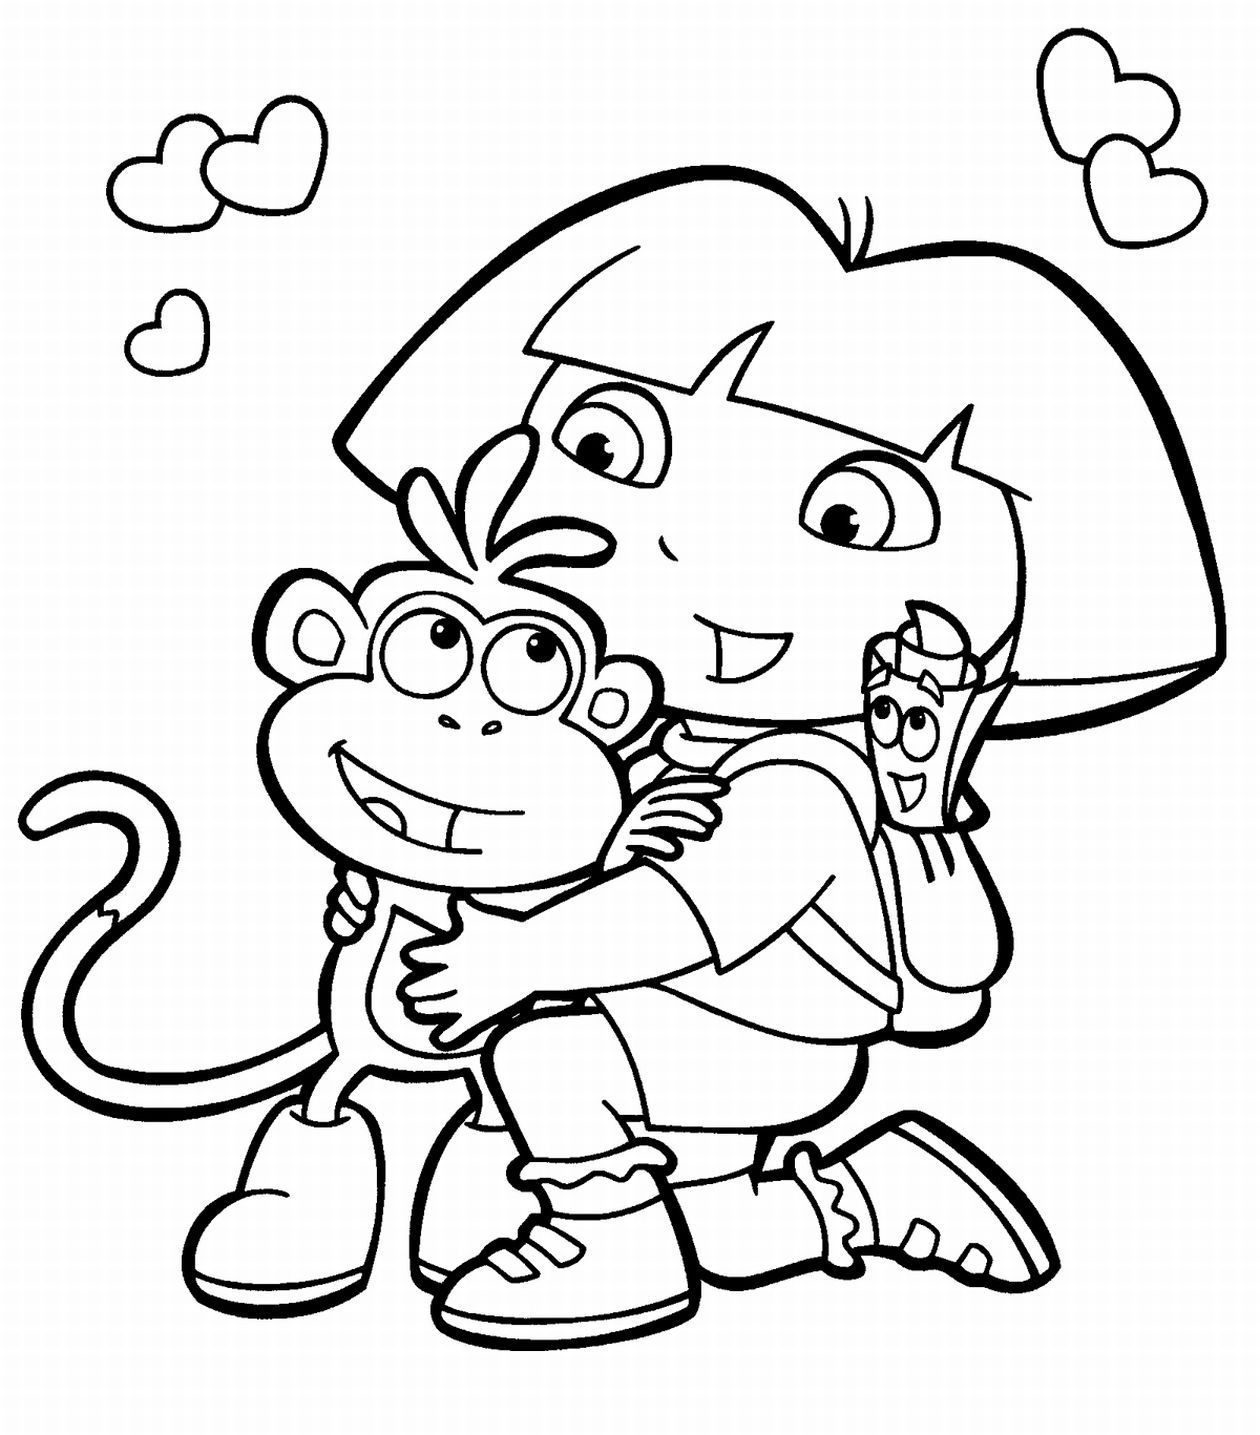 Coloring Blog for Kids: Dora coloring pages for kids